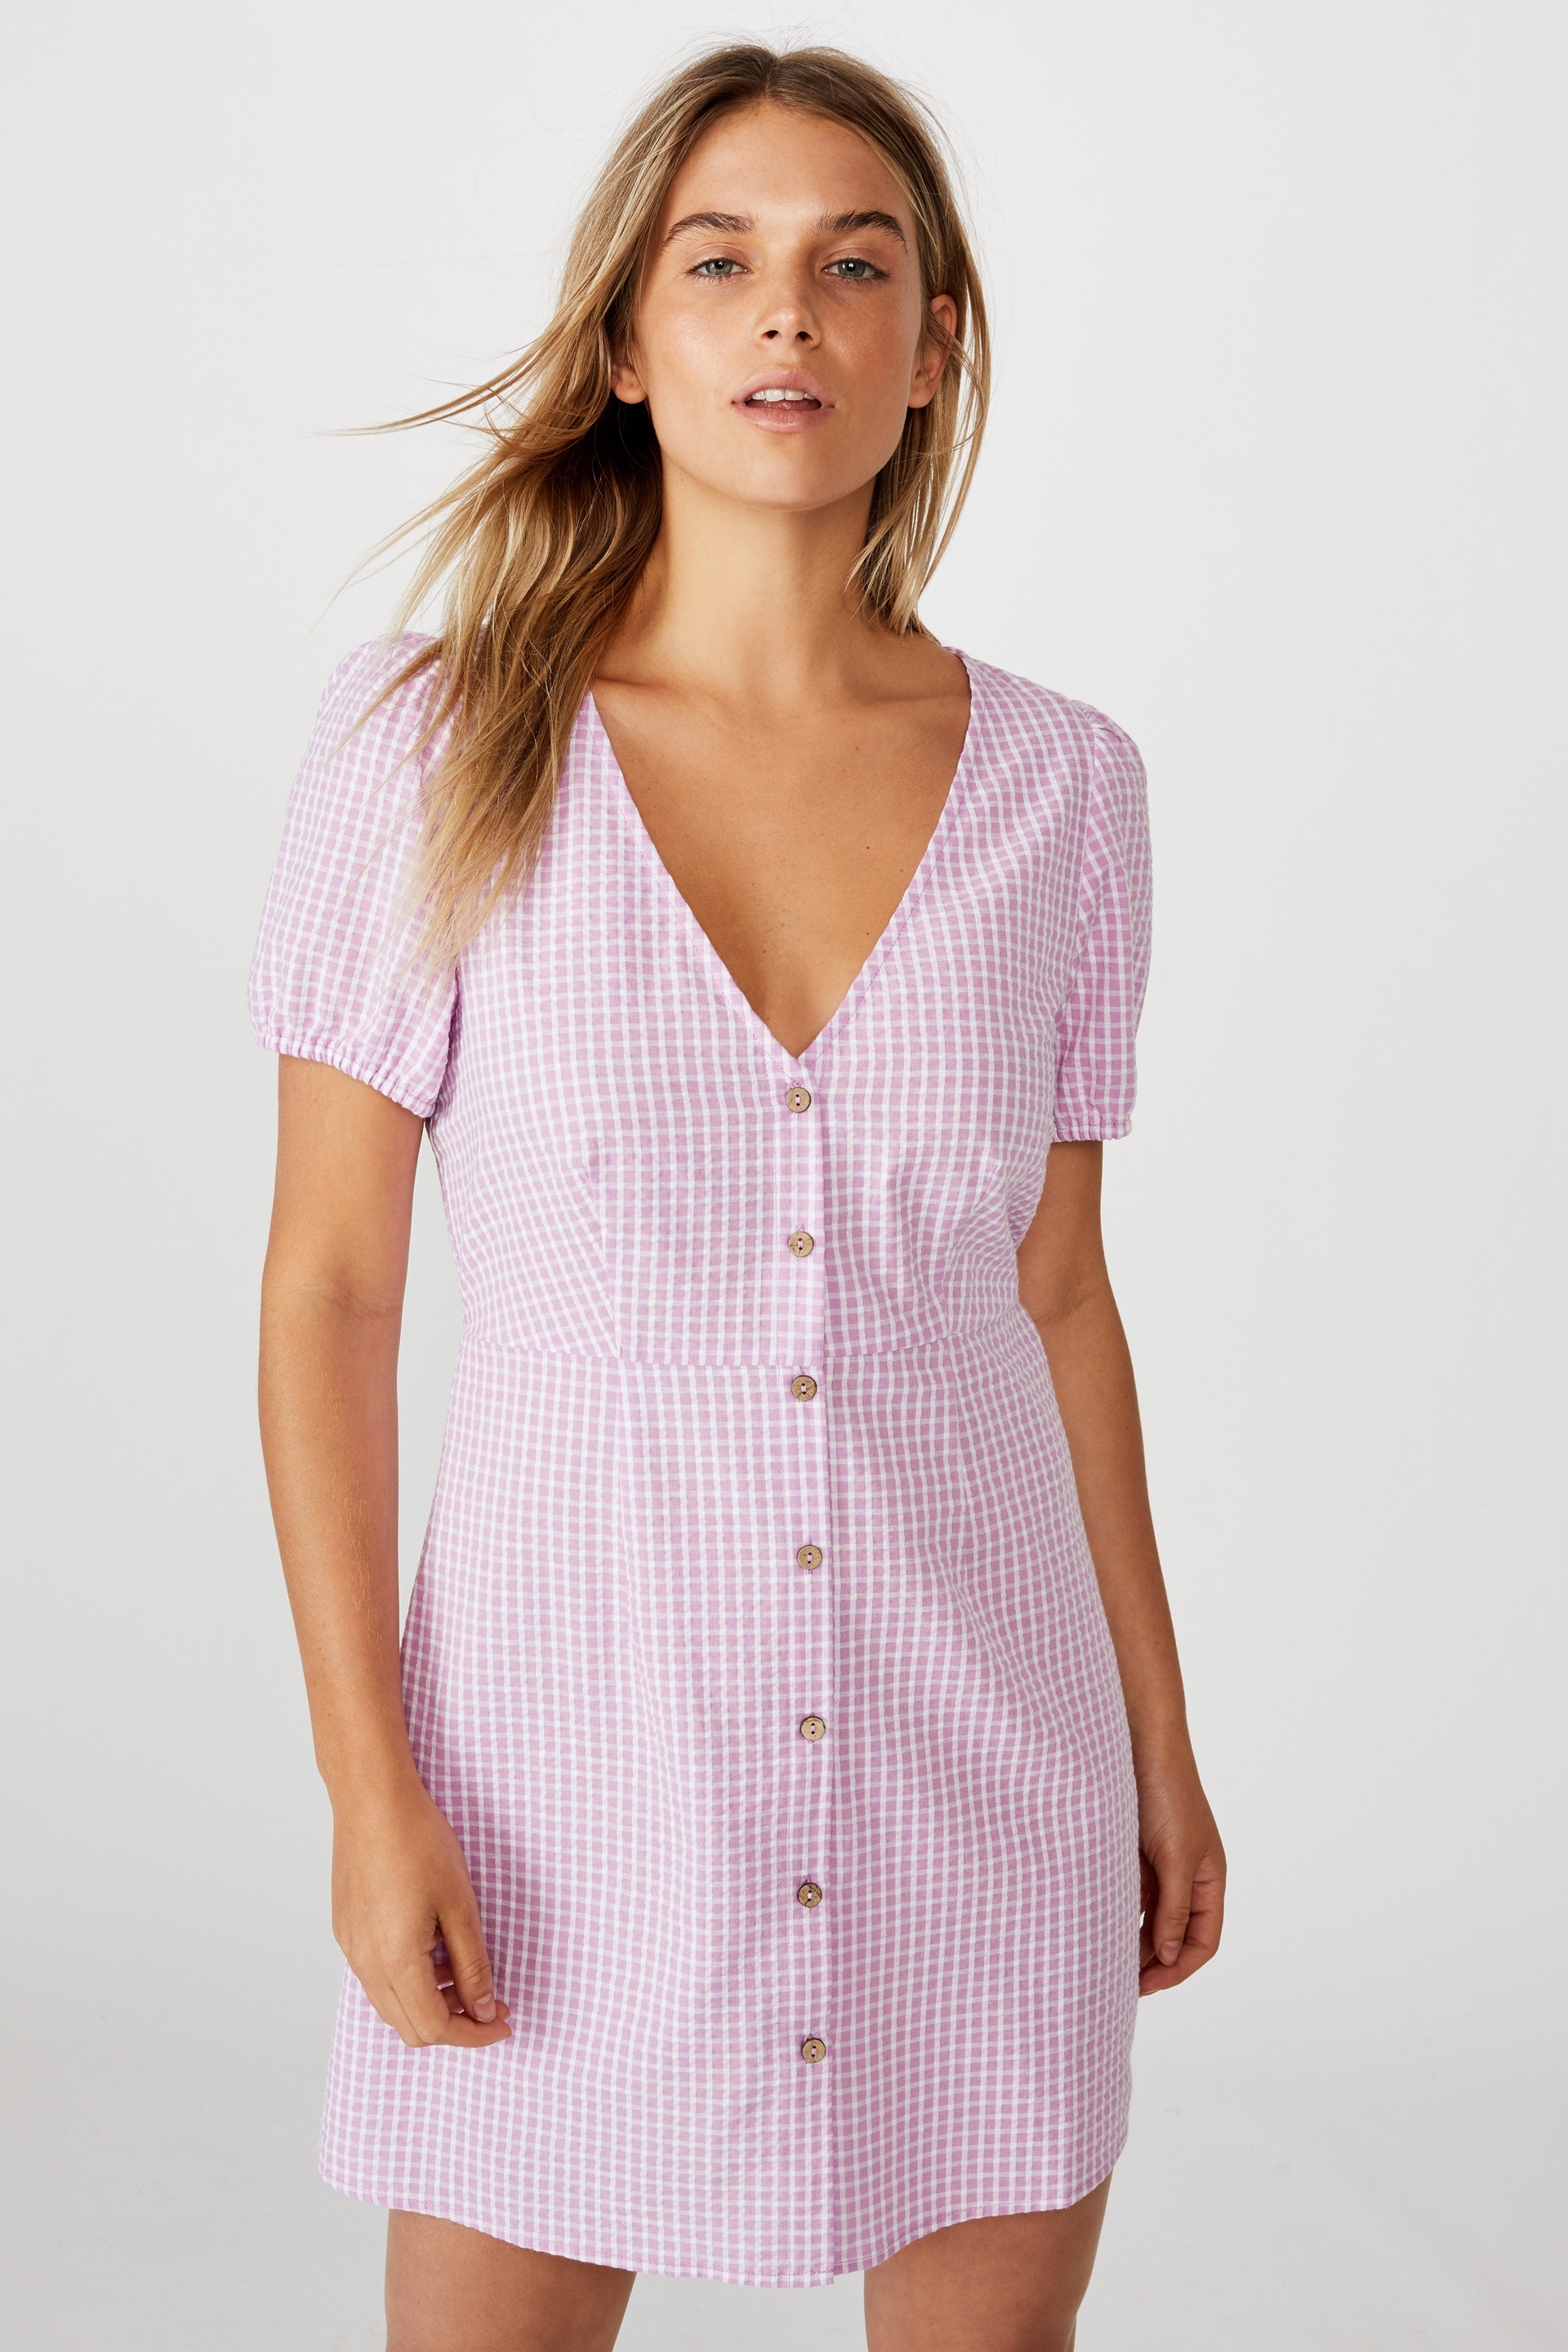 Cotton On Women - Woven Briony Button Front Mini Dress - Lana gingham lilac